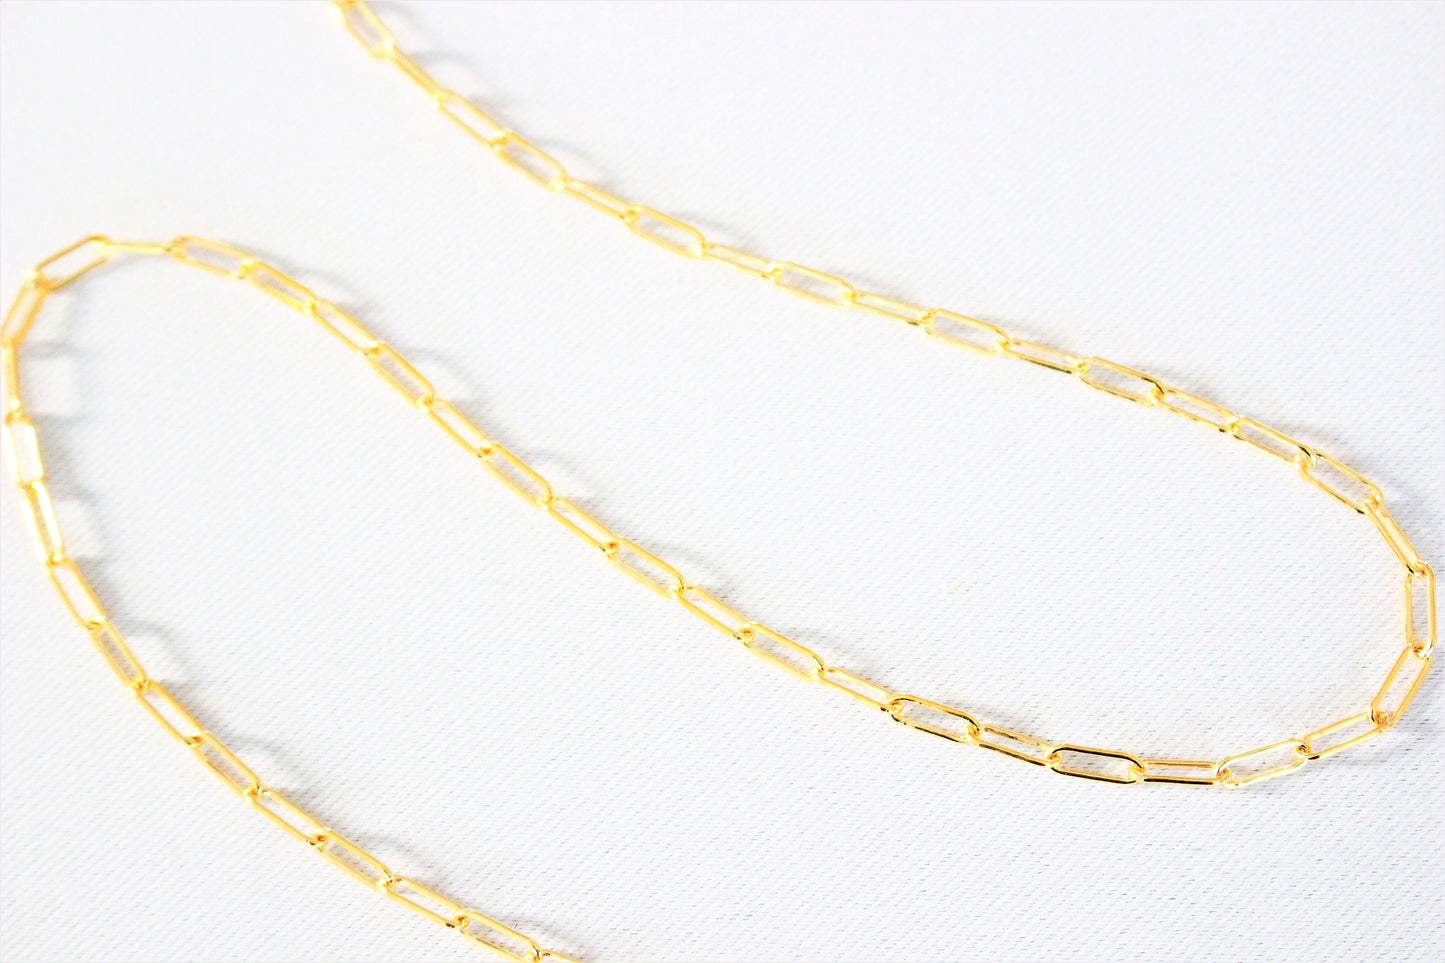 14k gold filled necklace ∙ Paperclip chain ∙ 3*8.8 mm ∙ 14k gold necklace ∙ Rectangle link chain ∙ Waterproof ∙ Choker necklace ∙ Bridesmaid